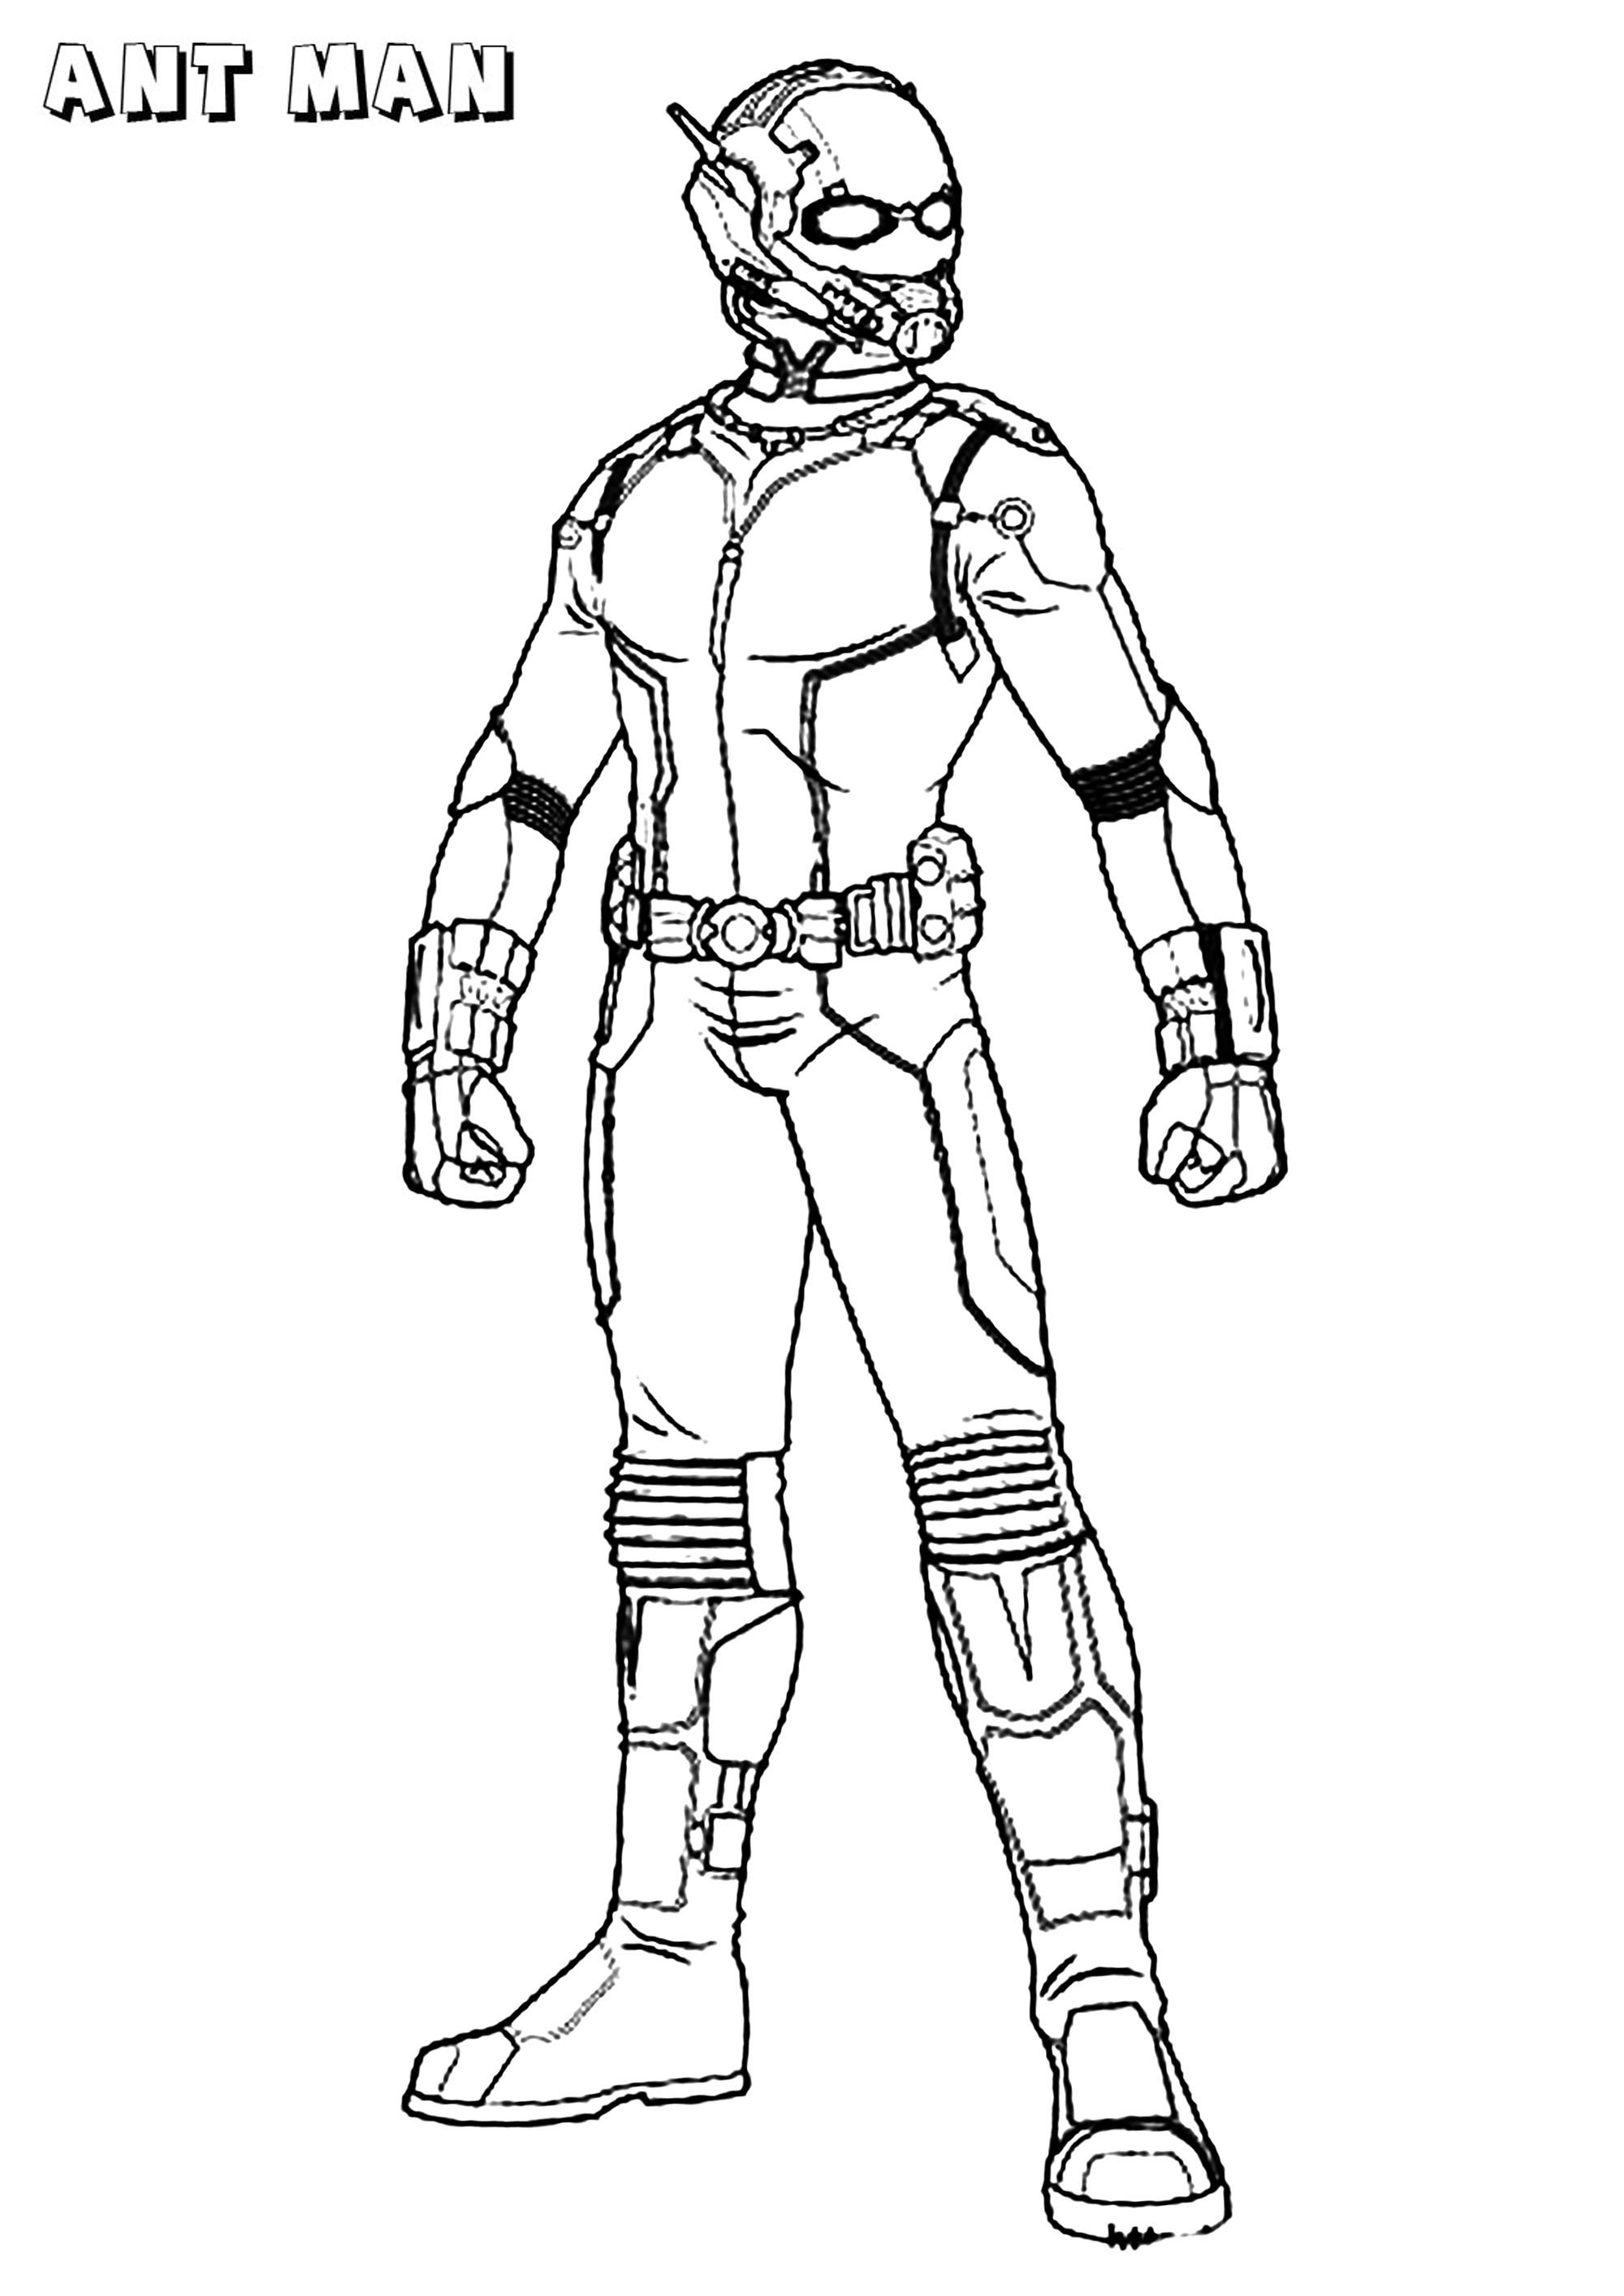 Ant-Man - Ant-Man Kids Coloring Pages